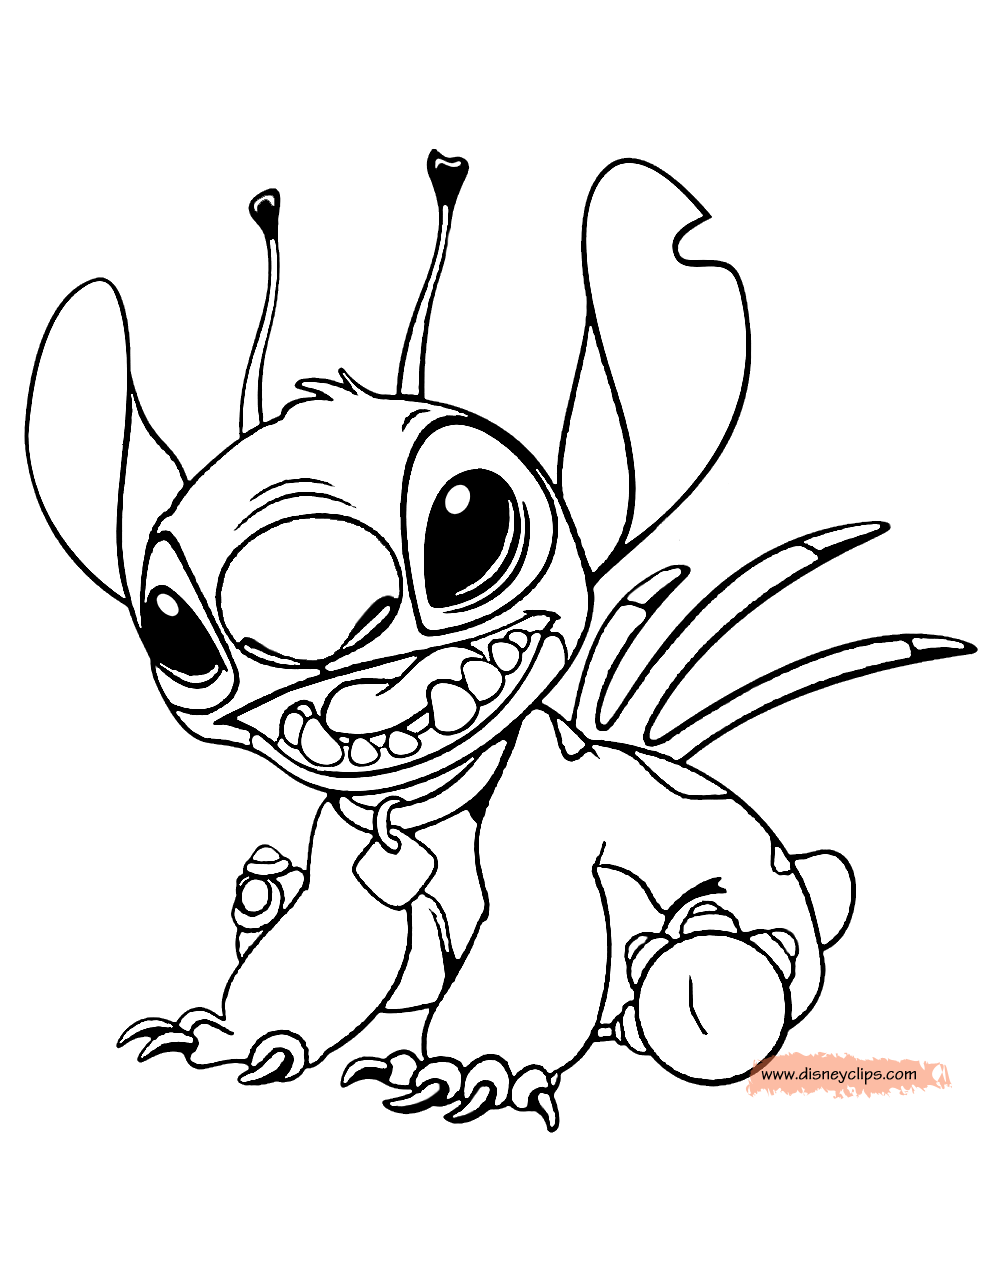 Lilo and Stitch Printable Coloring Pages   Disney Coloring ...